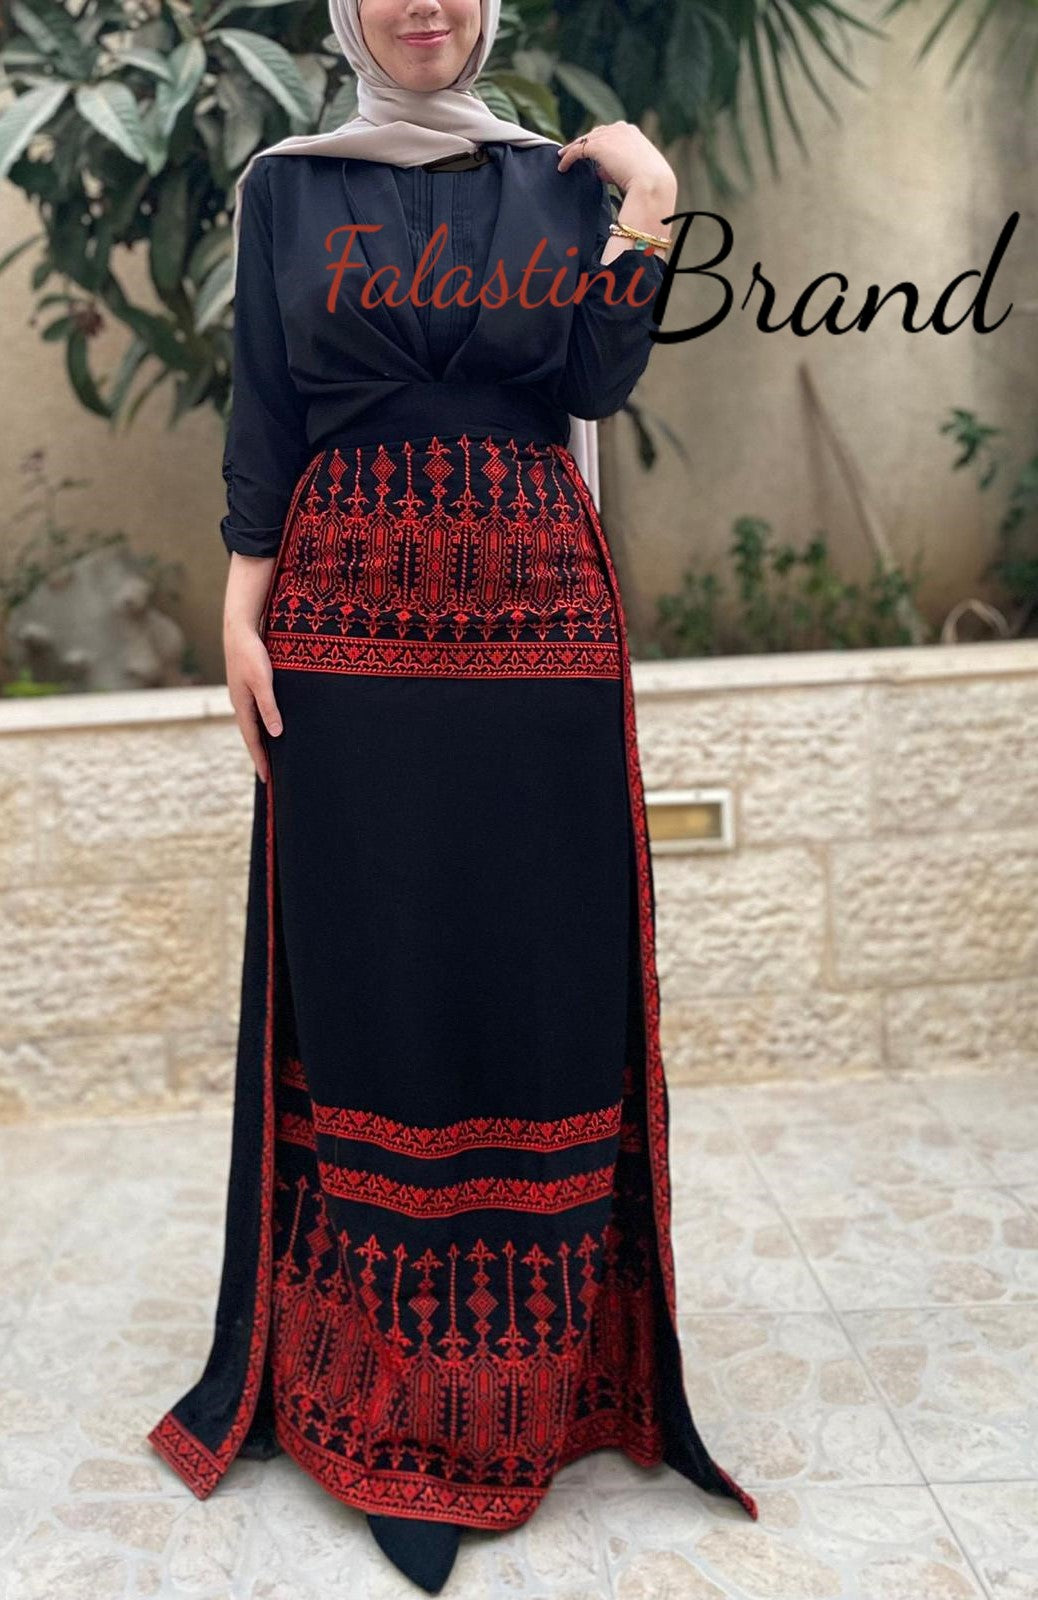 Amazing Black Maxi  Red Embroidered Skirt with Back Layer